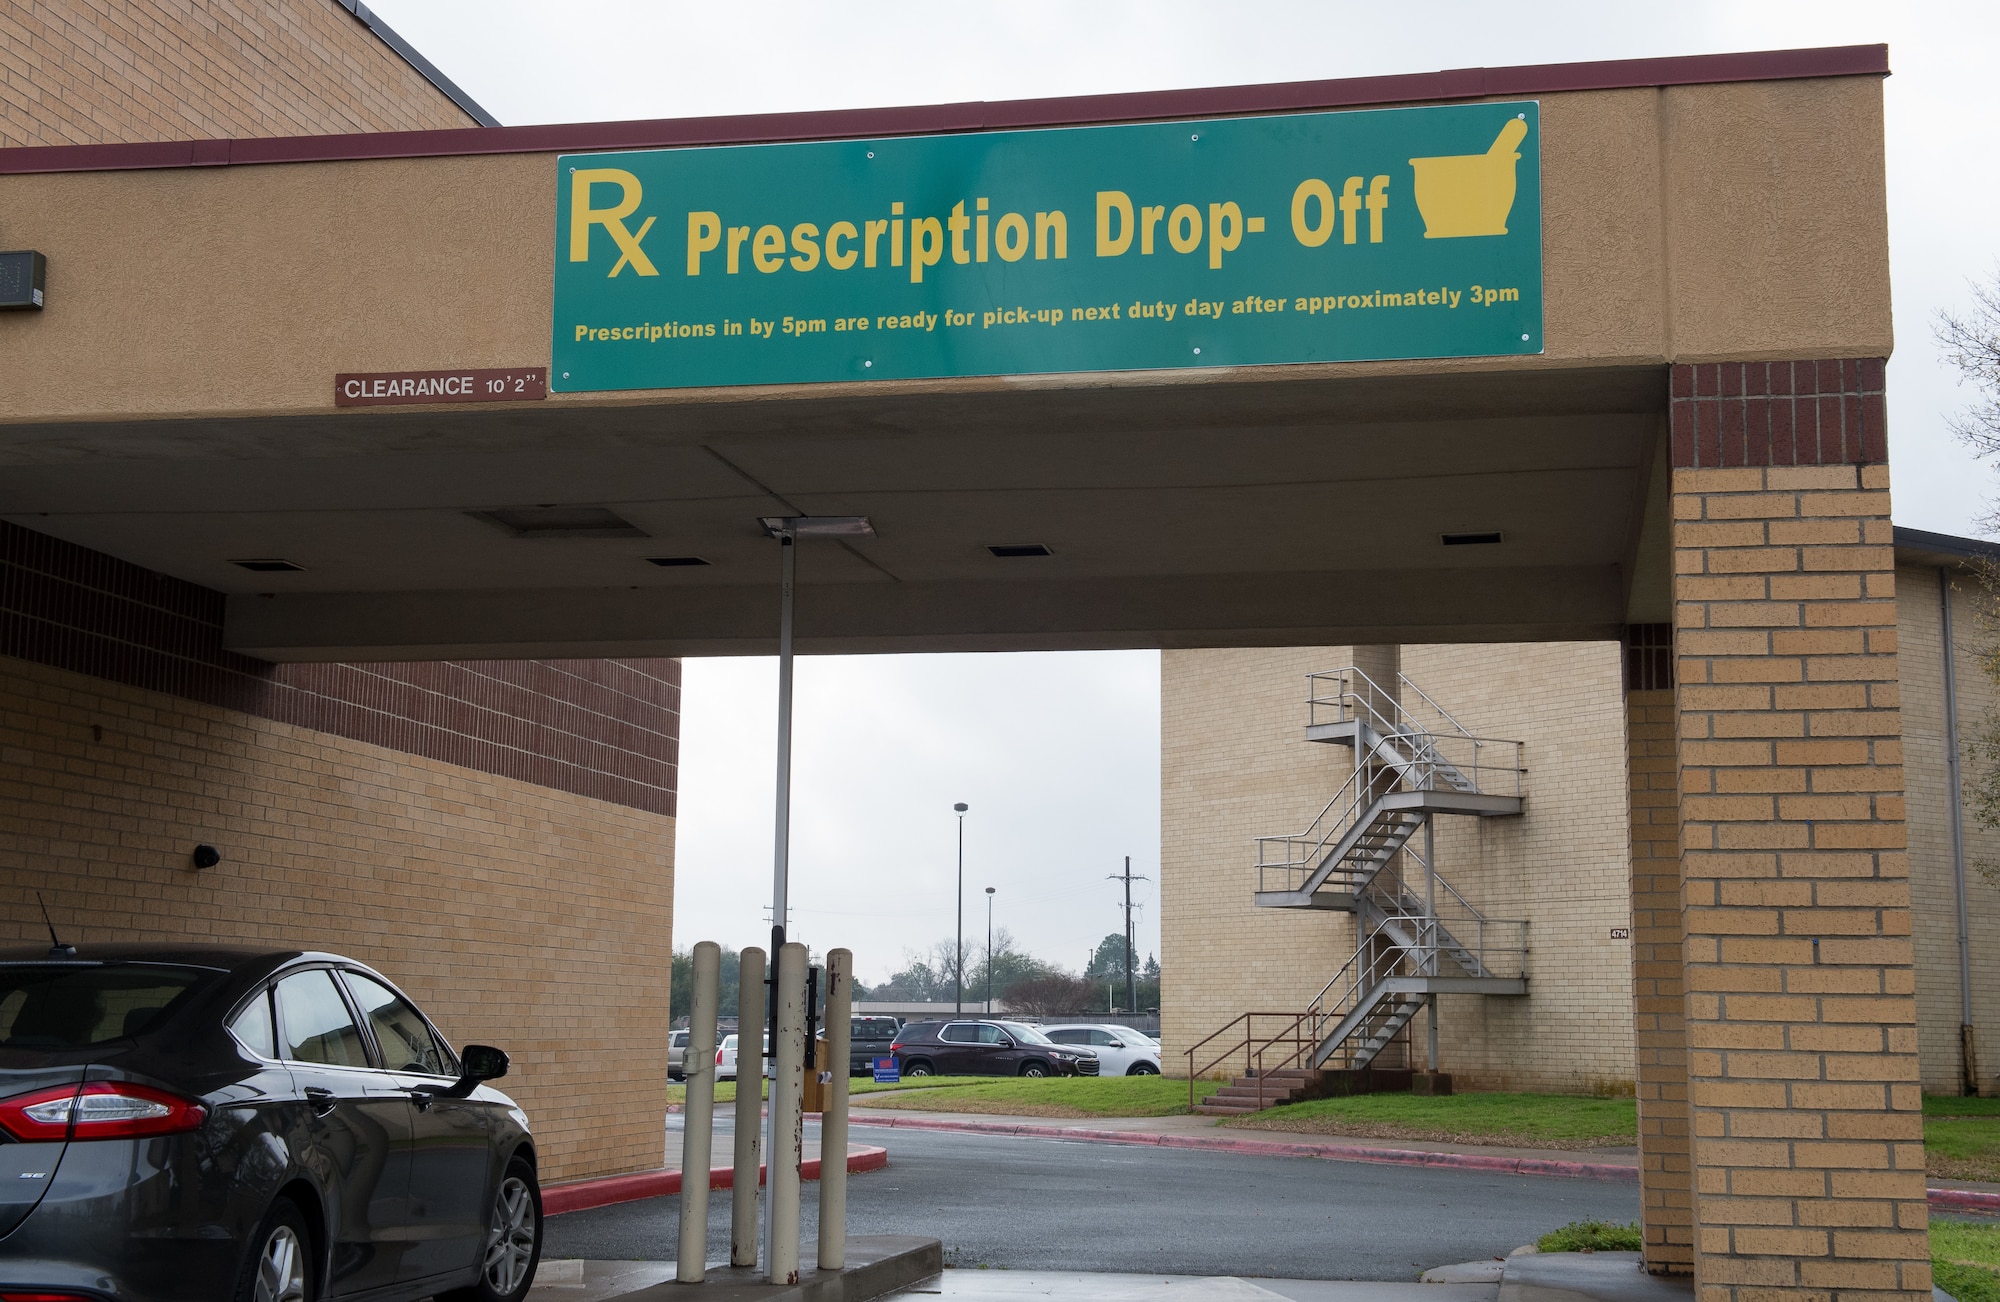 A prescription drop box is located in the second drive-thru lane outside of the 2nd Medical Group Satellite Pharmacy at Barksdale Air Force Base, Feb. 5, 2019. The drop boxes are intended to be used by patients who don’t want to wait in line and can wait to receive their medications until the next duty day. (U.S. Air Force photo by Senior Airman Cassandra Johnson)